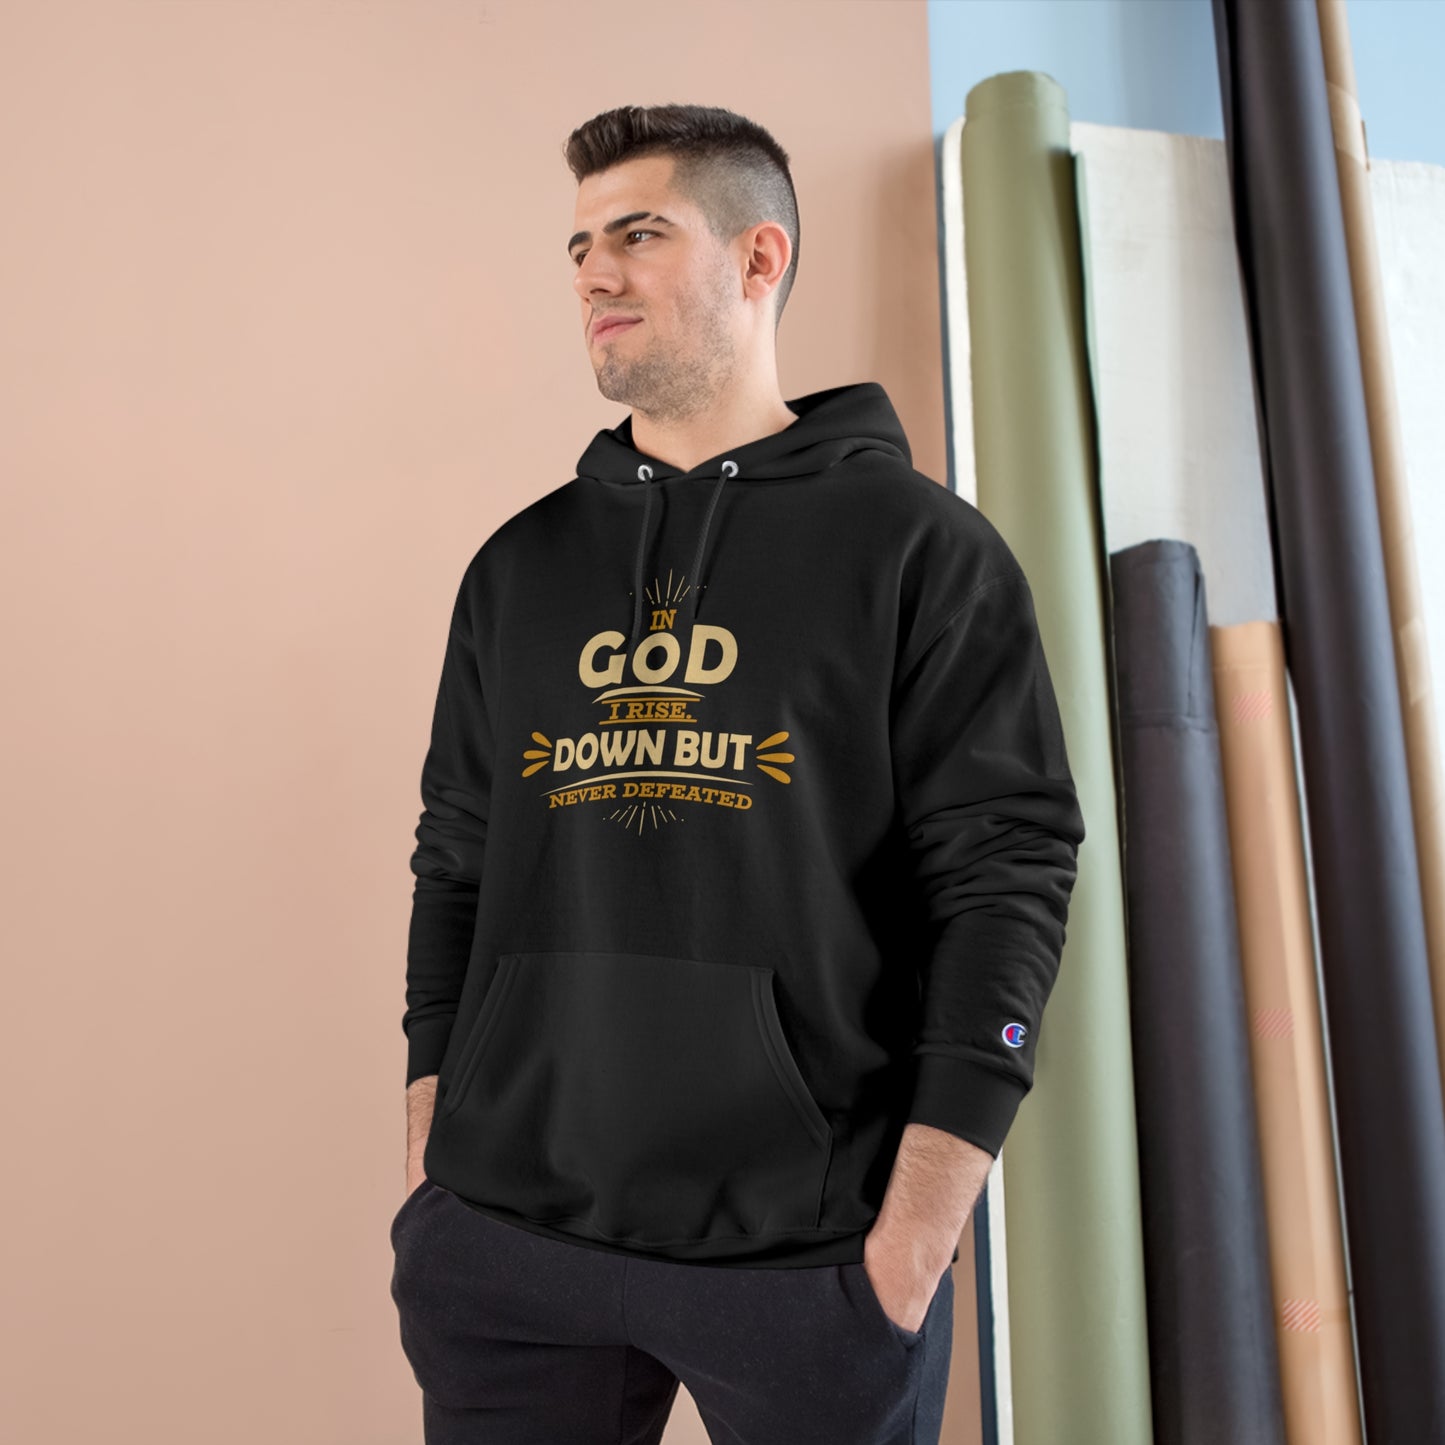 In God I Rise Down But Never Defeated Unisex Champion Hoodie